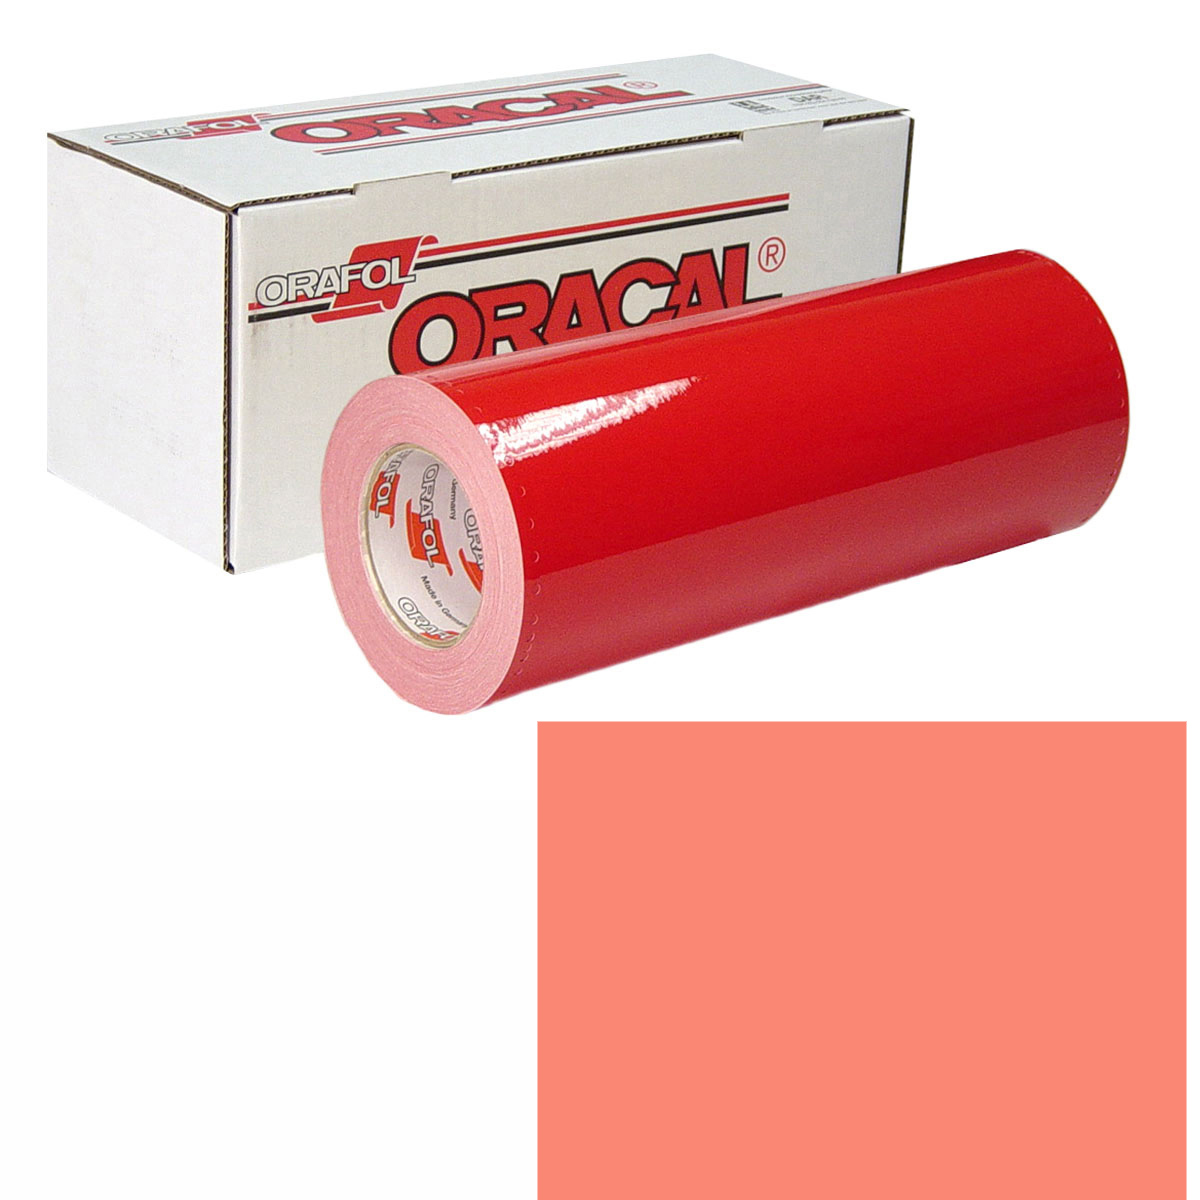 ORACAL 951 30in X 10yd 341 Coral